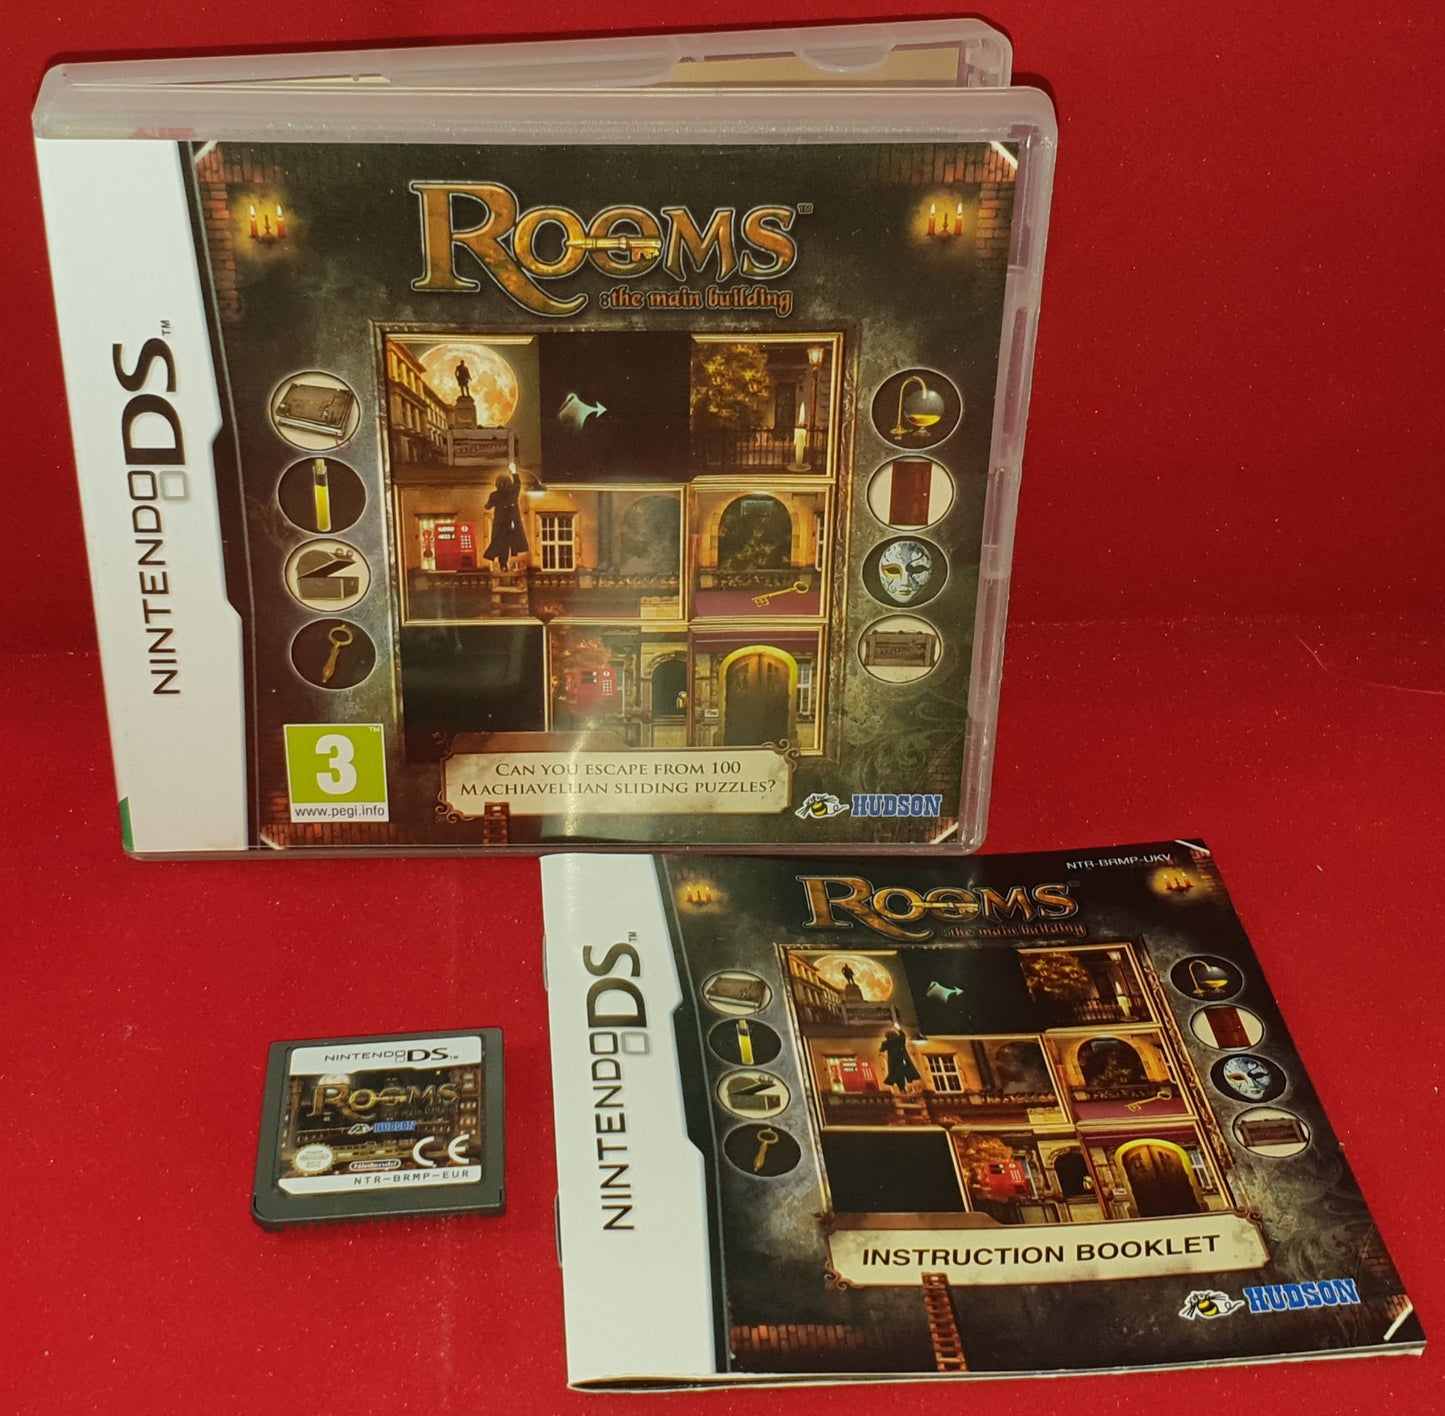 Rooms the Main Building Nintendo DS Game